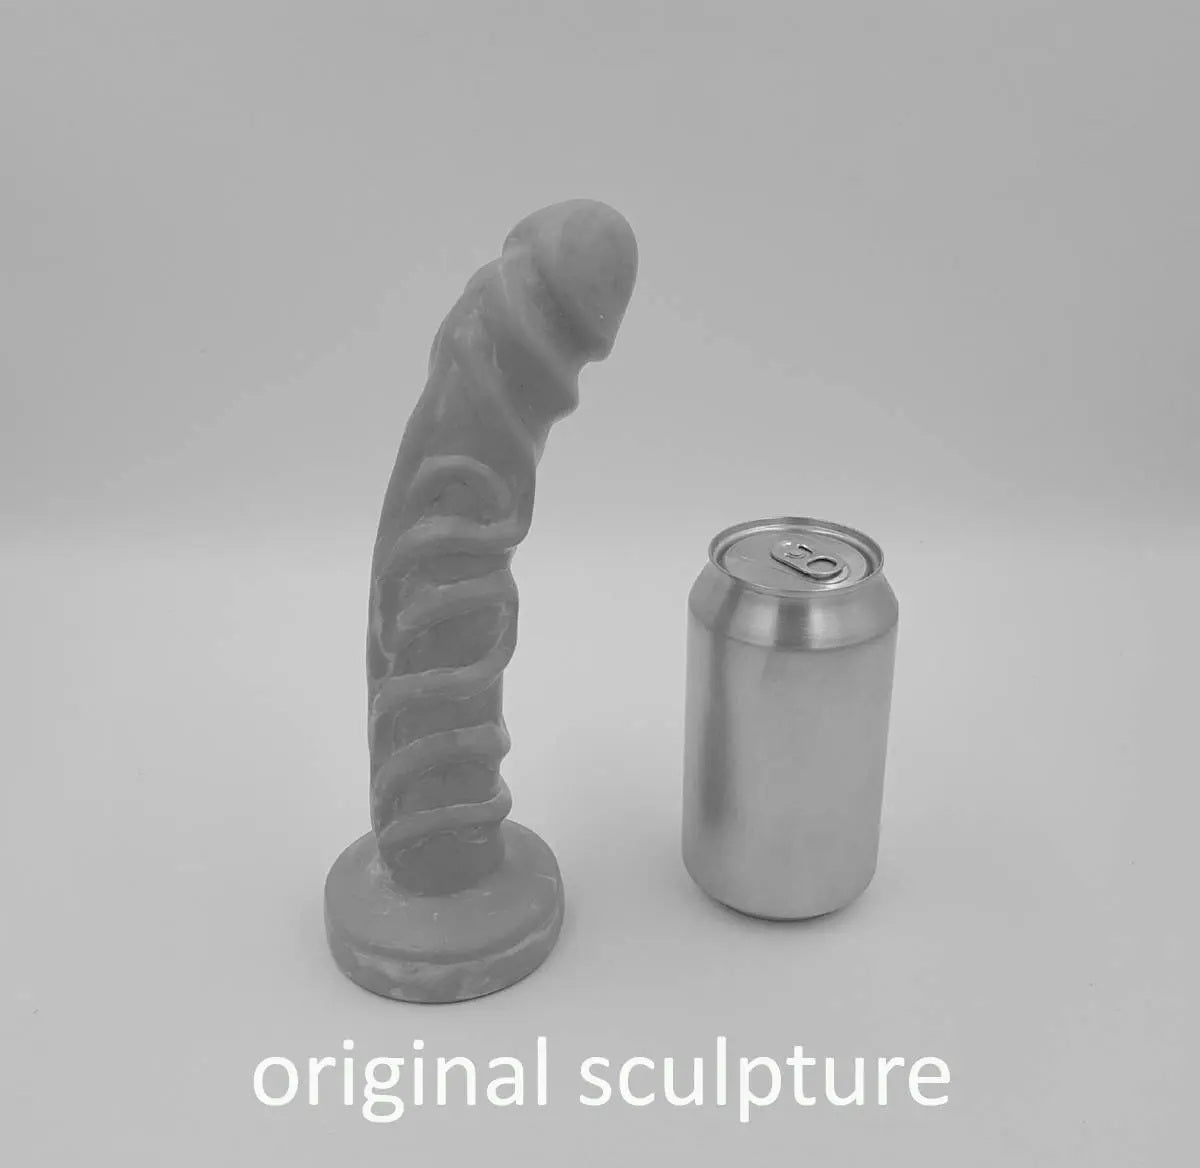 Night King Dildo original sculpture standing vertically next to soda can for size comparison; photo is in gray scale